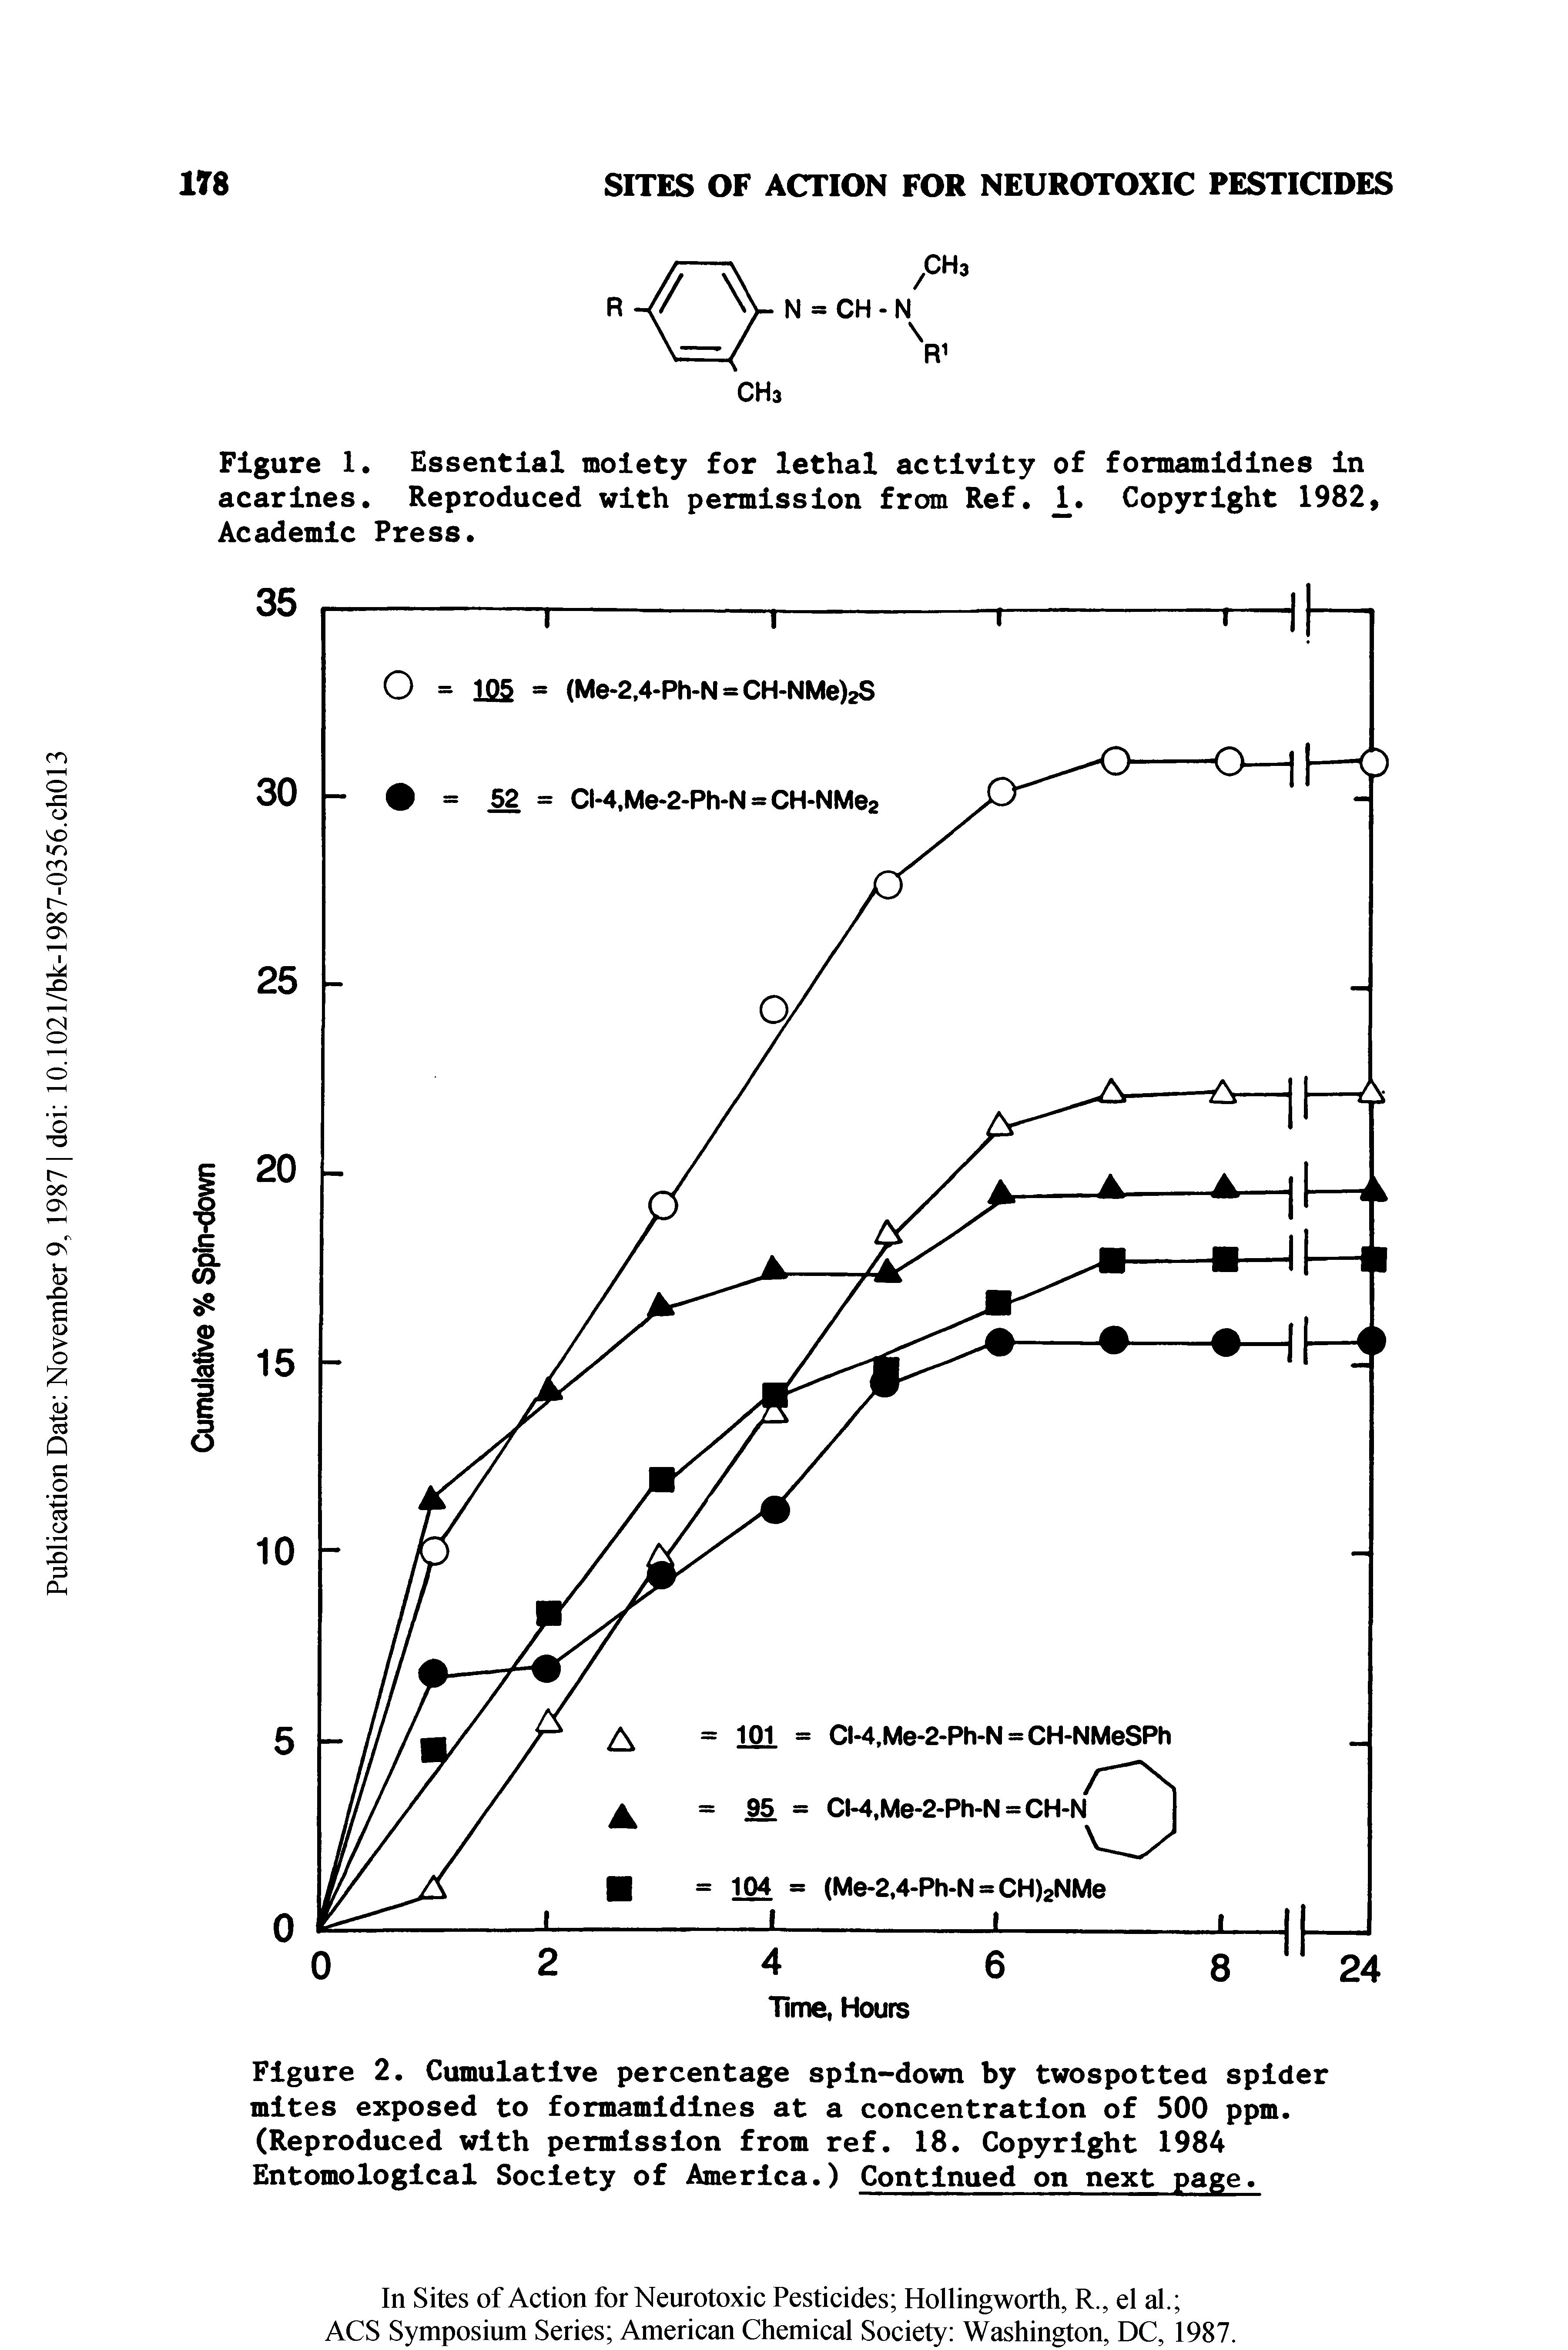 Figure 1. Essential moiety for lethal activity of formamidines in acarines. Reproduced with permission from Ref. K Copyright 1982, Academic Press.